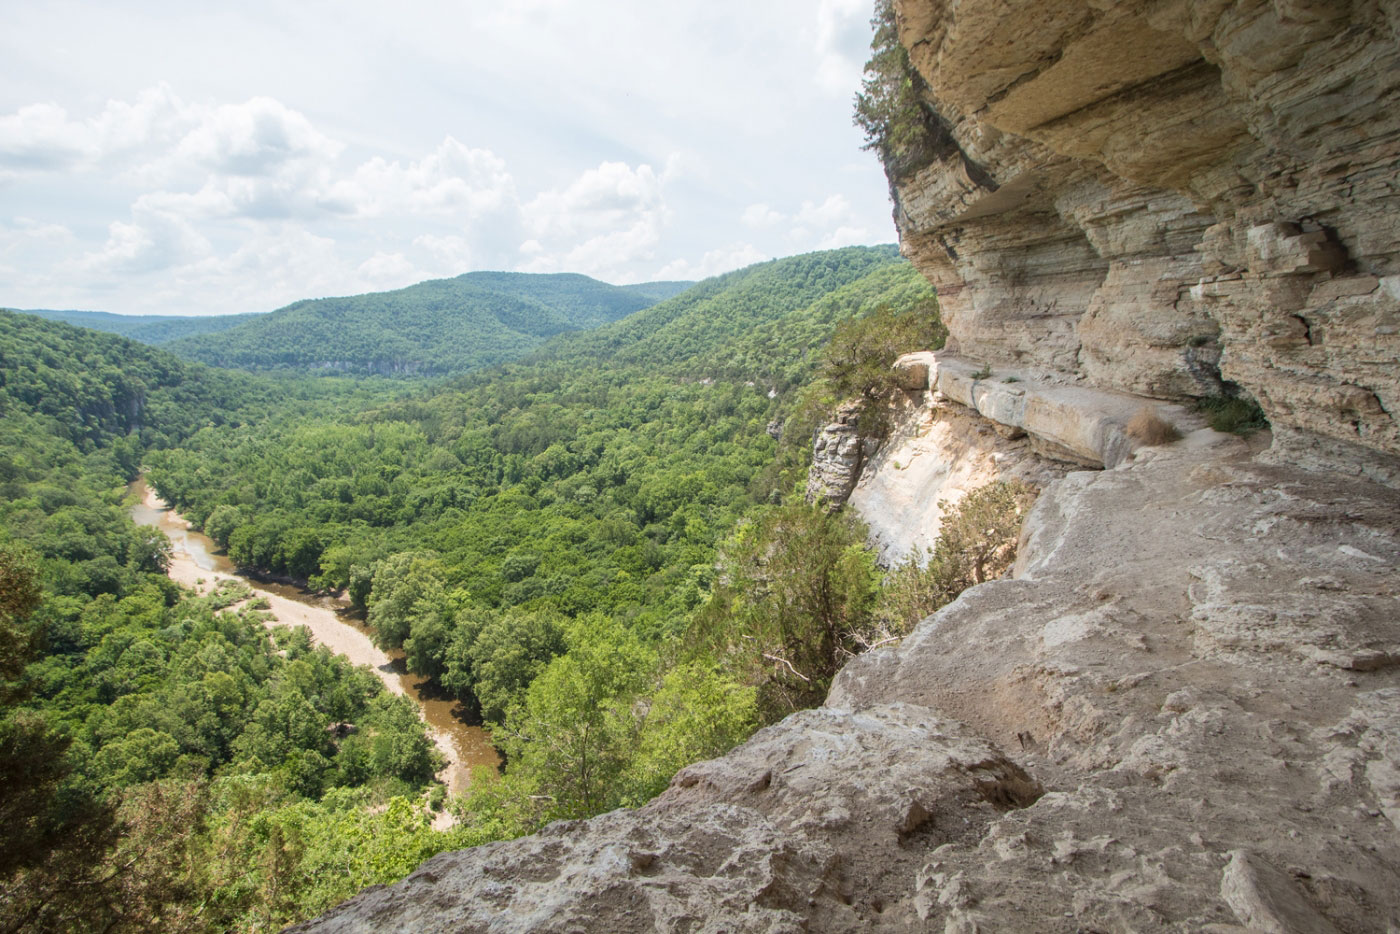 Hike Big Bluff via Centerpoint Trail in Buffalo National River, Arkansas - Stav is Lost